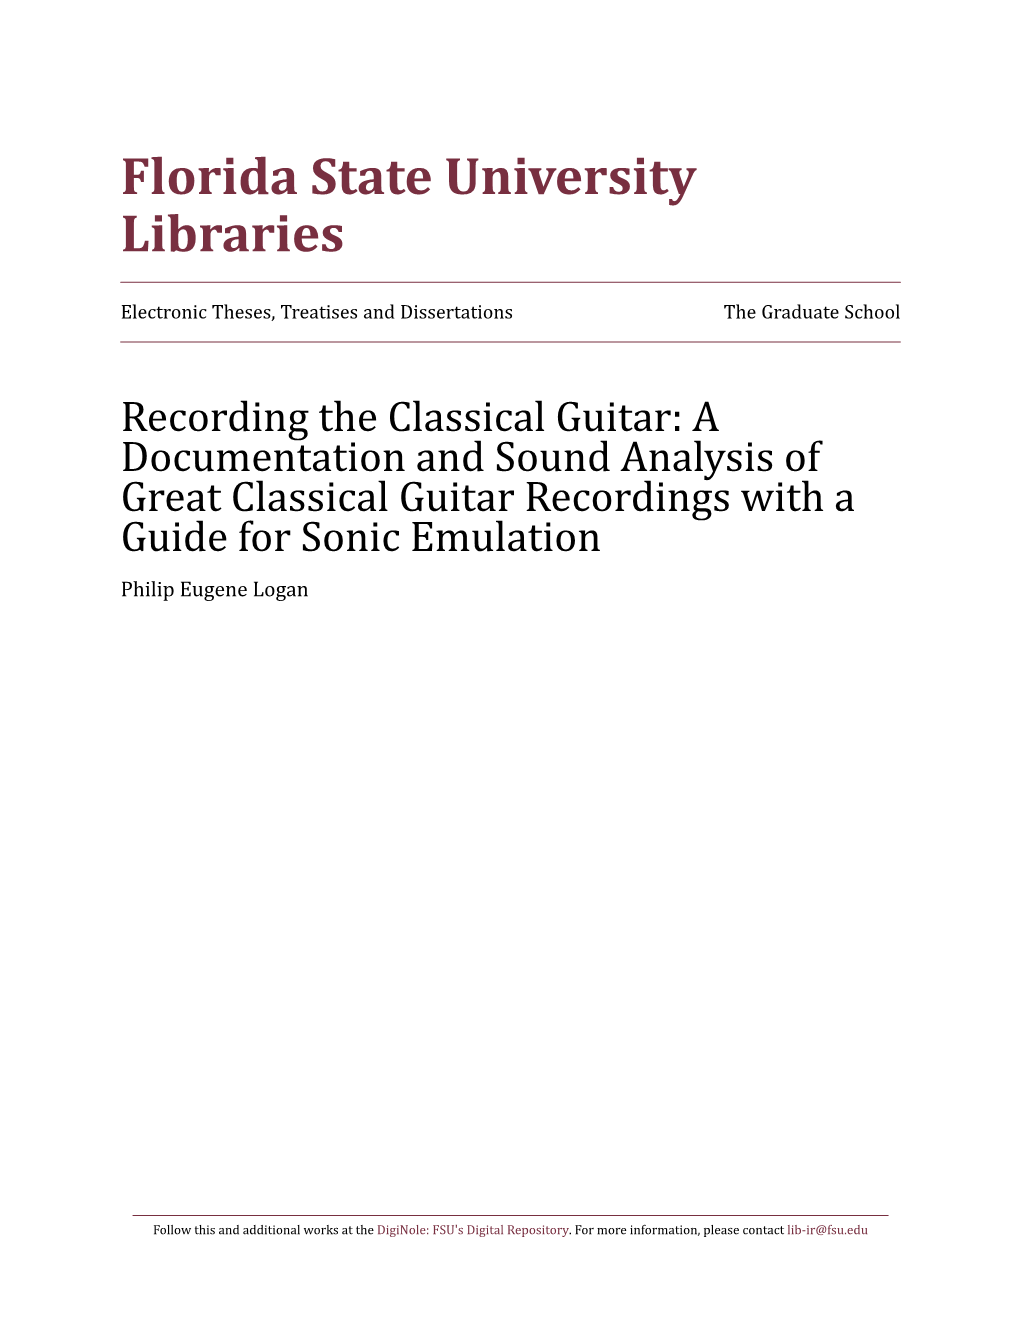 Recording the Classical Guitar: a Documentation and Sound Analysis of Great Classical Guitar Recordings with a Gphiulipi Edugeen Ef Olorga Nsonic Emulation